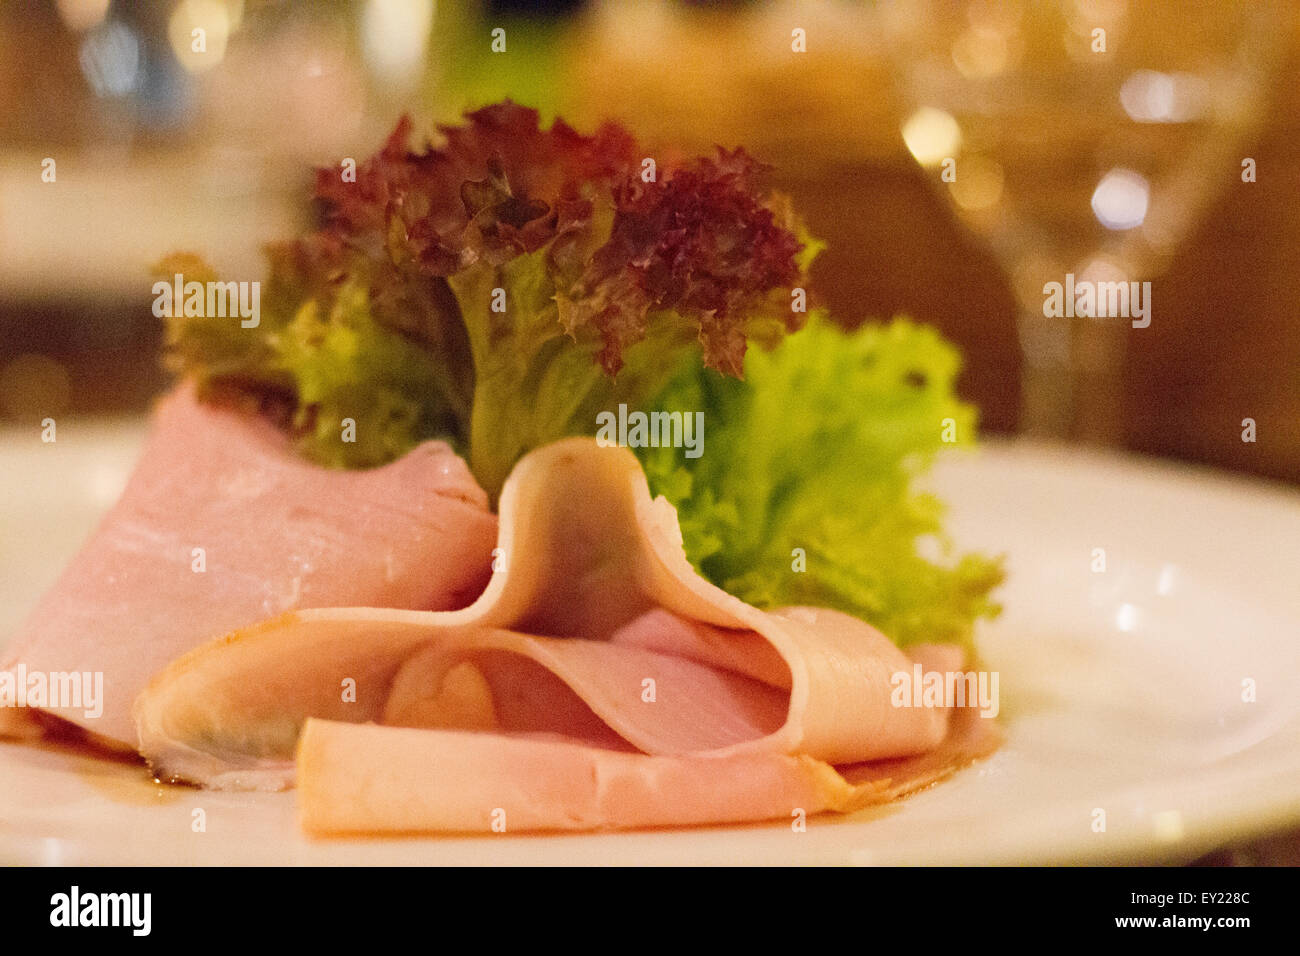 Ham with lettuce plate Stock Photo